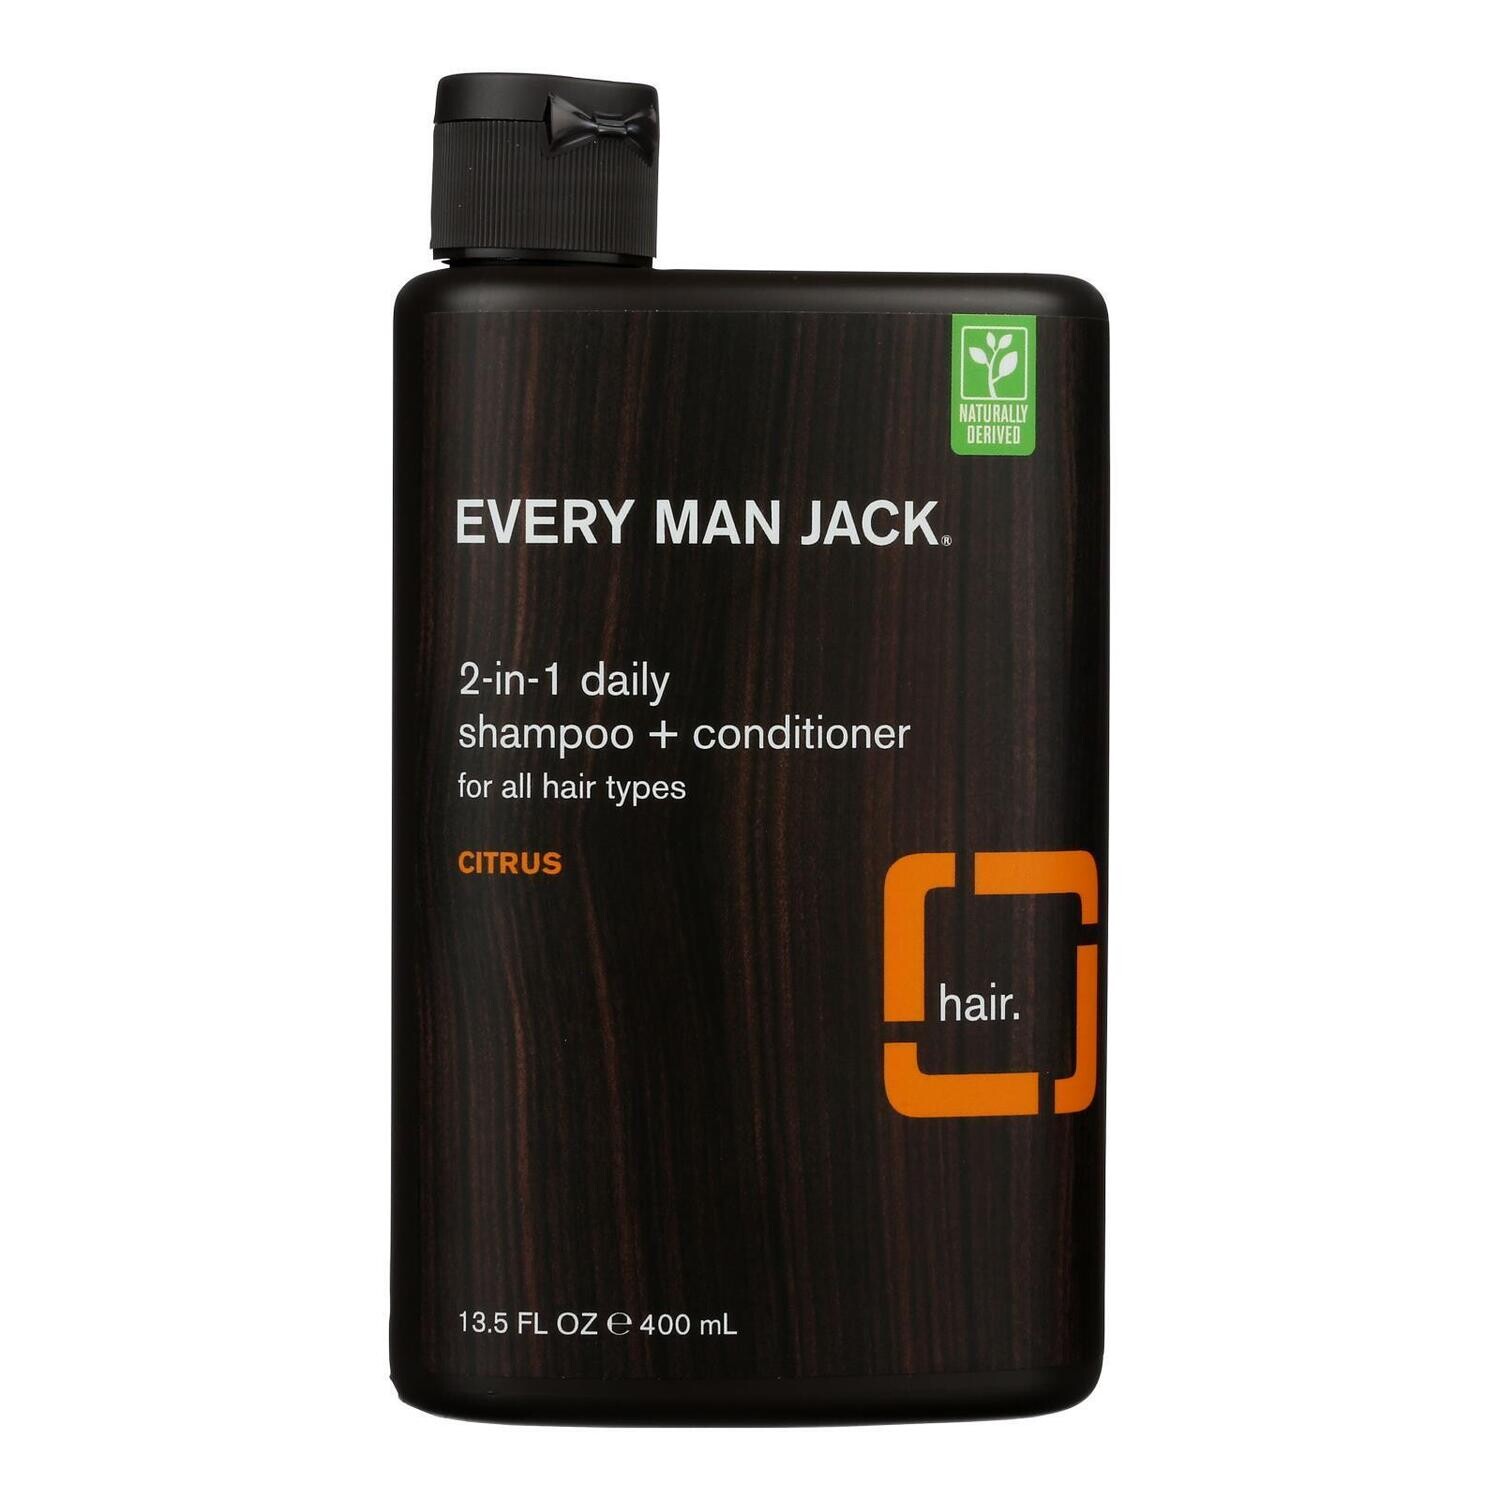 Every Man Jack 2 in 1 Shampoo plus Conditioner - Daily - Scalp and Hair - All Hair Types - 13.5 oz